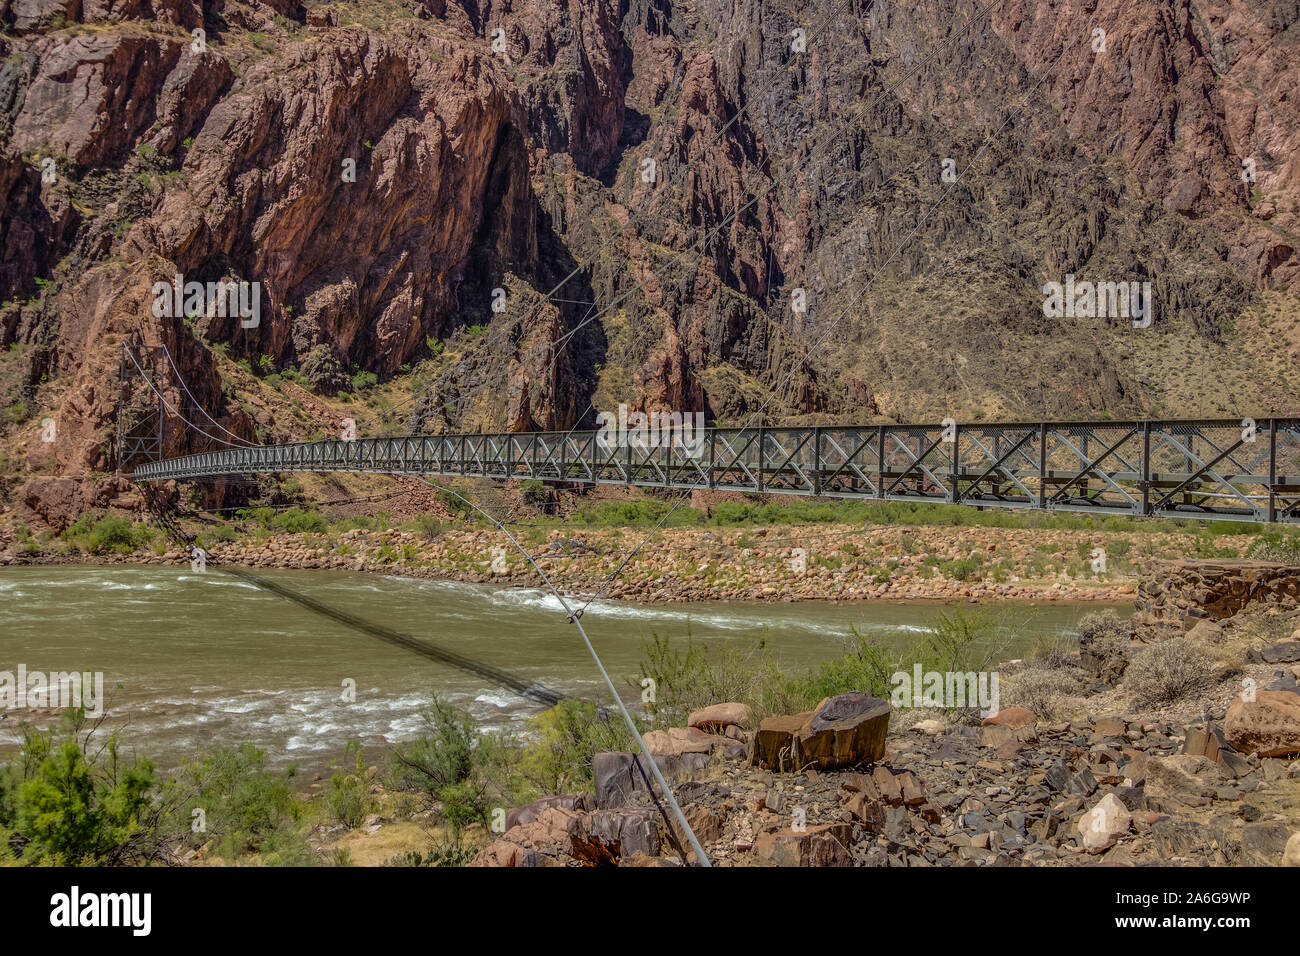 Silver Bridge across the Colorado River at the Bottom of the Grand Canyon on Bright Angel Trail and South Kaibab Trail near Phantom Ranch Stock Photo